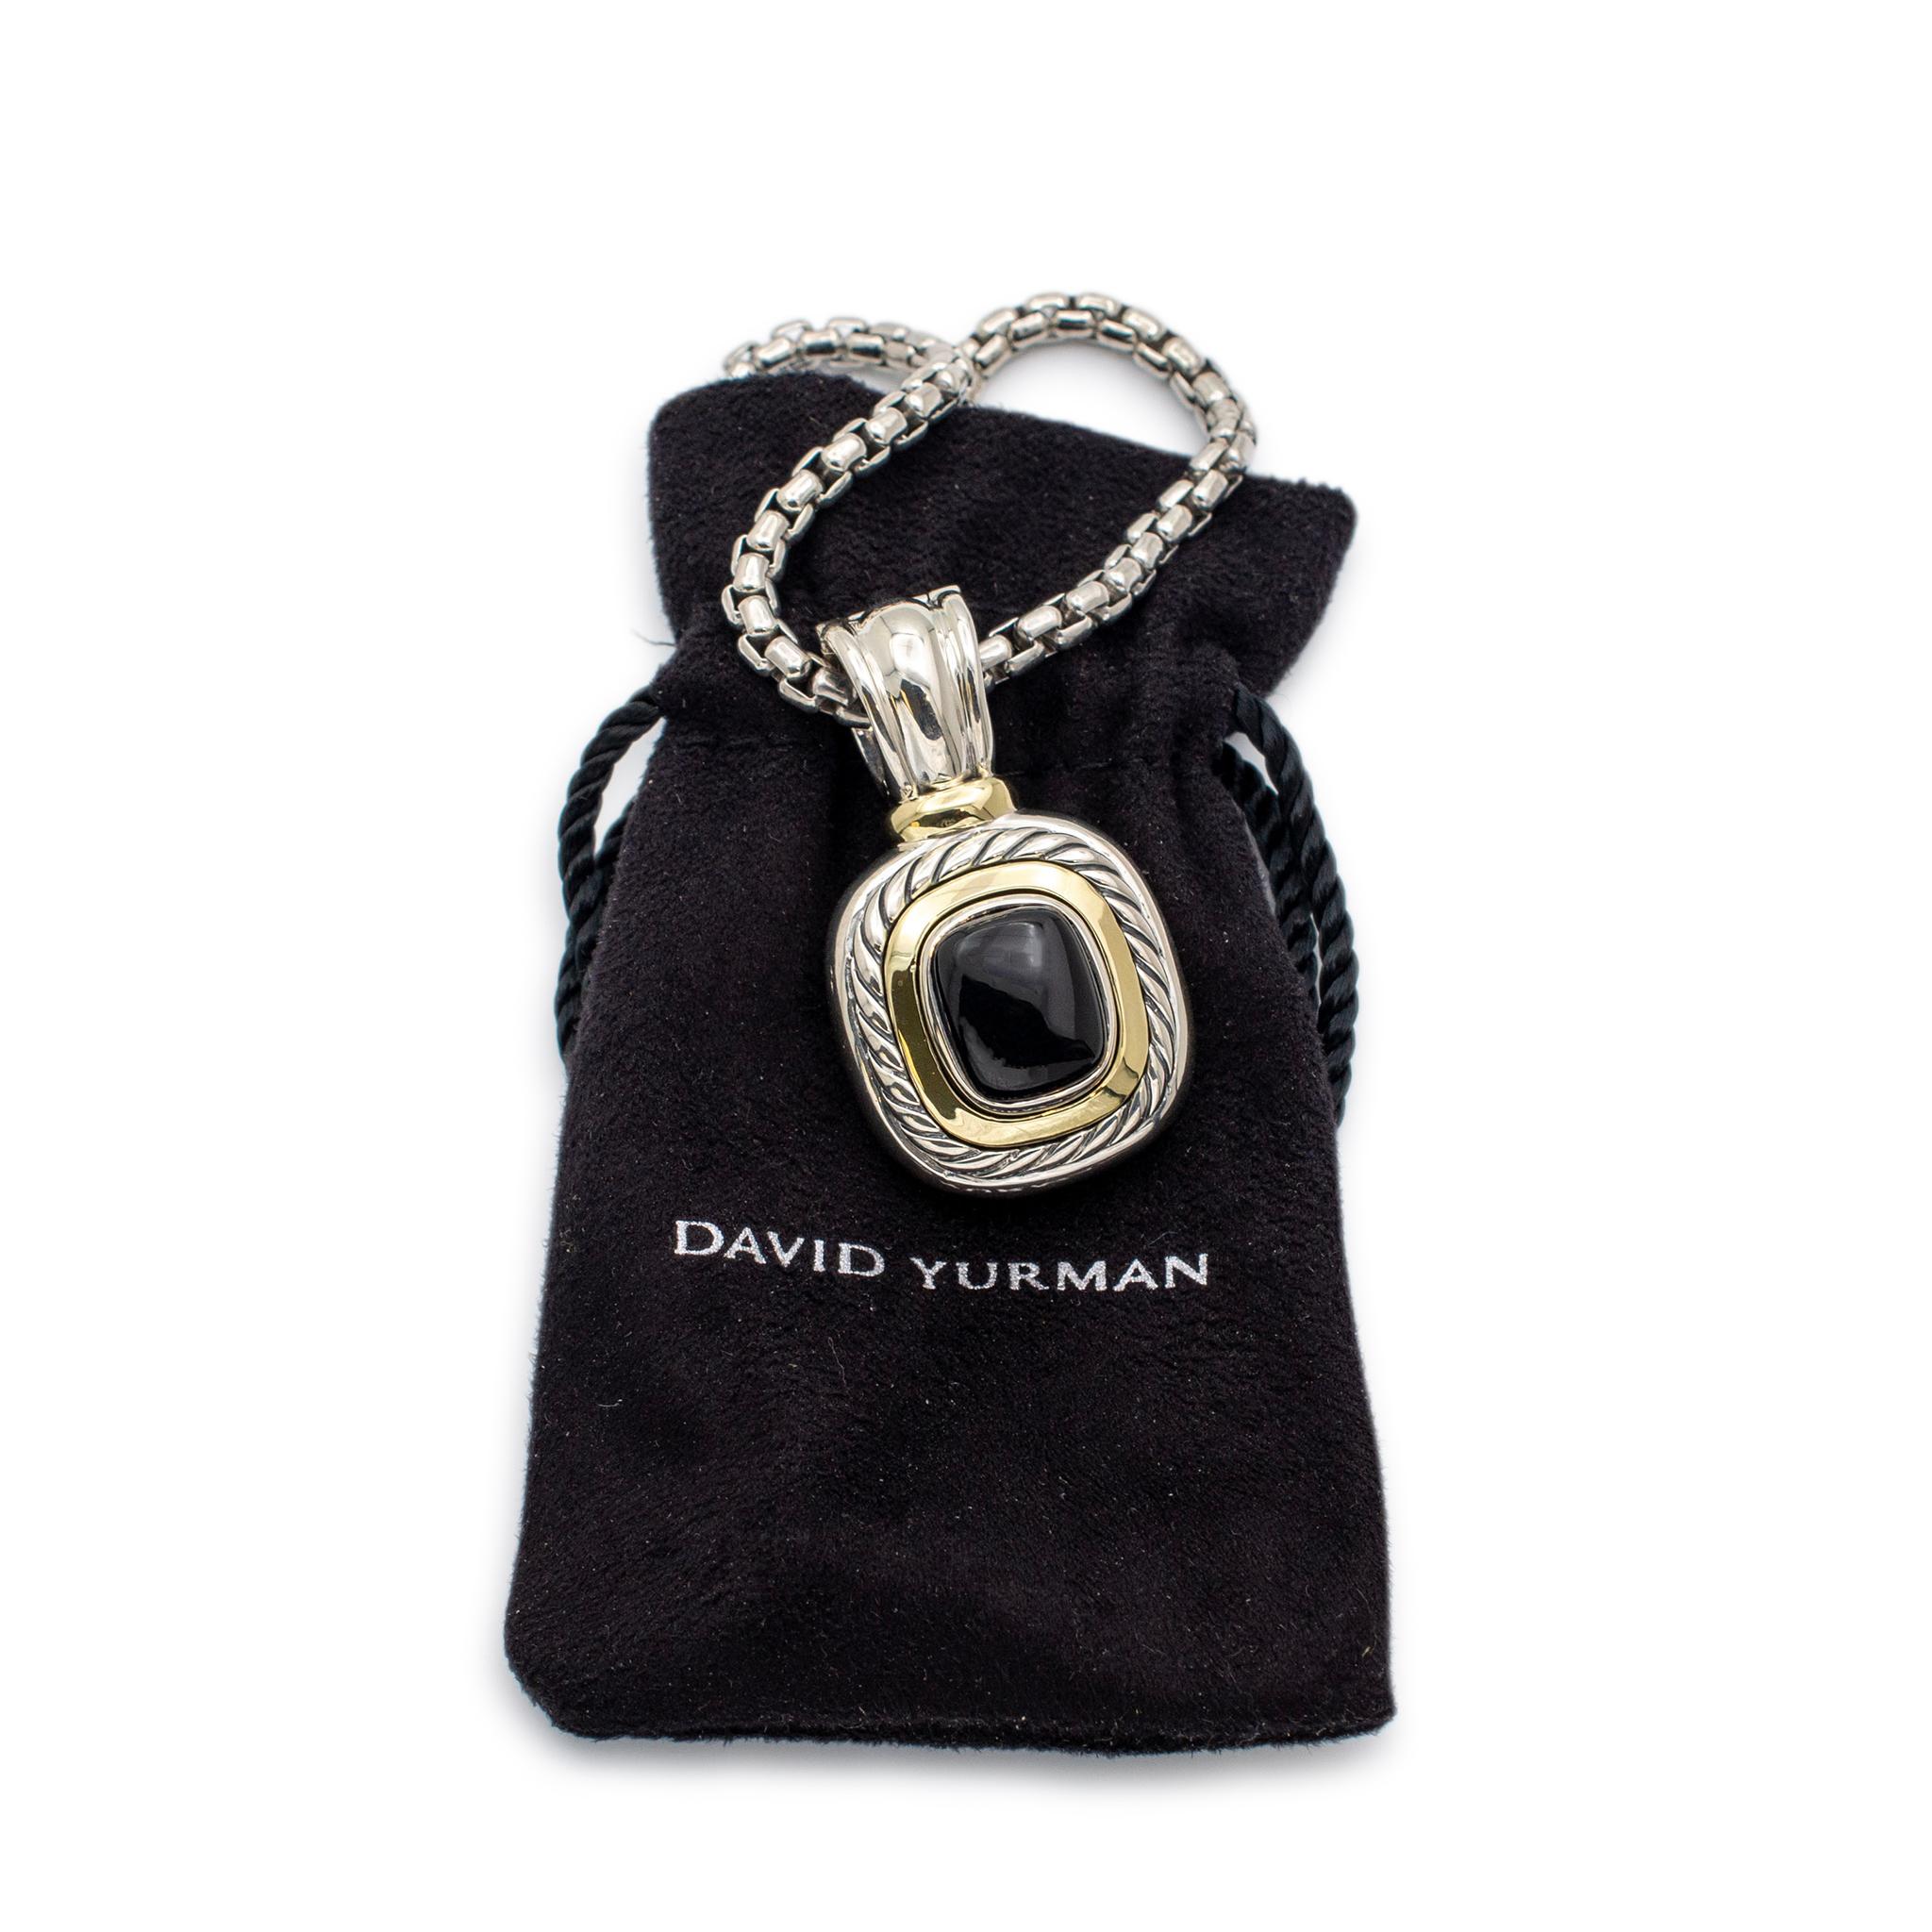 David Yurman 925 Sterling Silver & 14K Yellow Gold Pendant Necklace For Sale 1